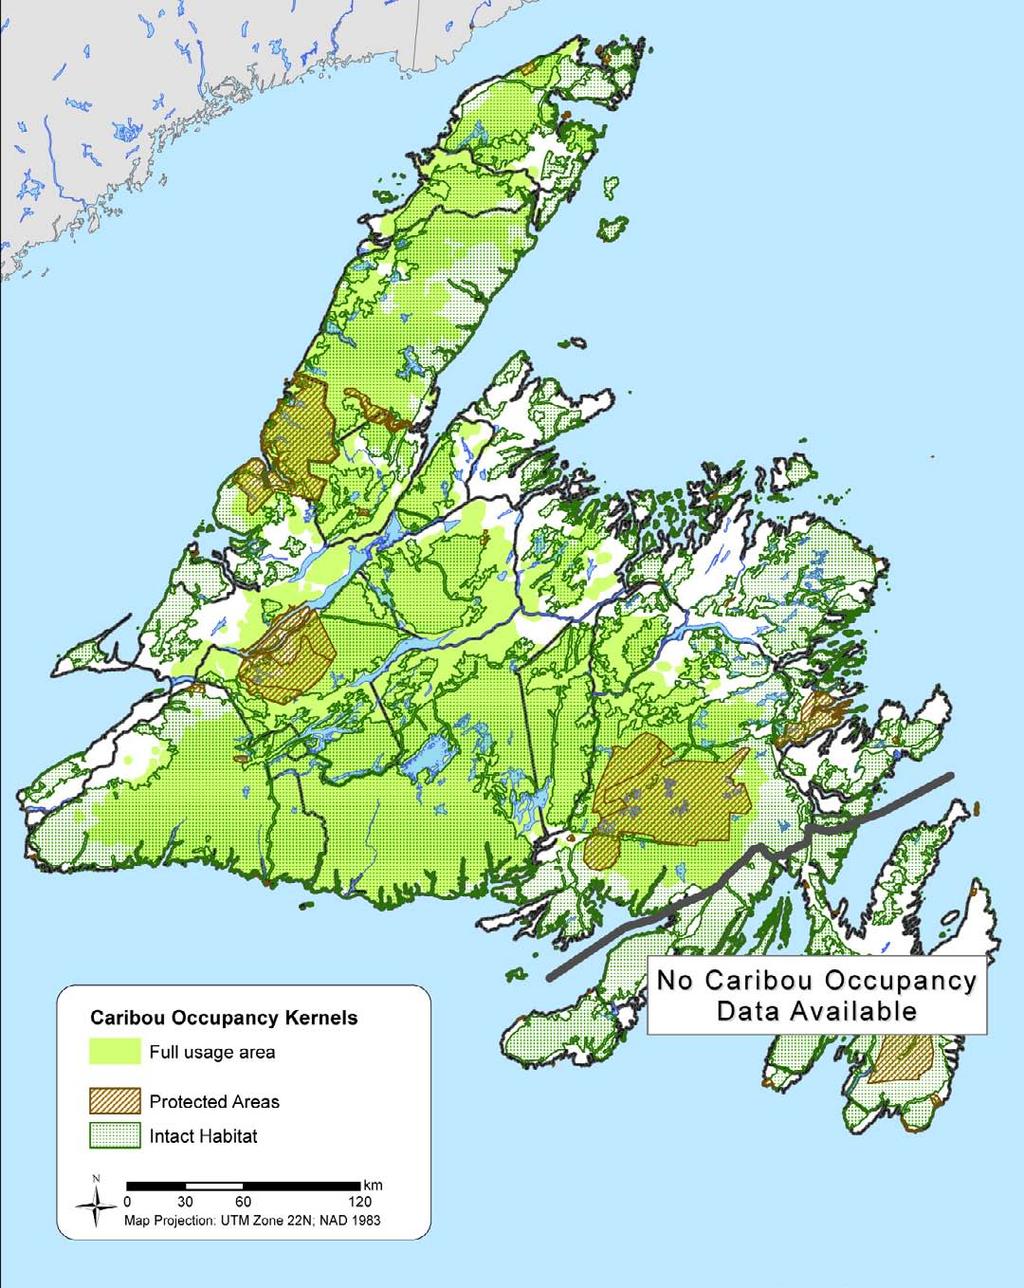 Figure 6 Areas of highest caribou use as determined by recent satellite and radio tracking of caribou in comparison to large intact habitat landscapes.